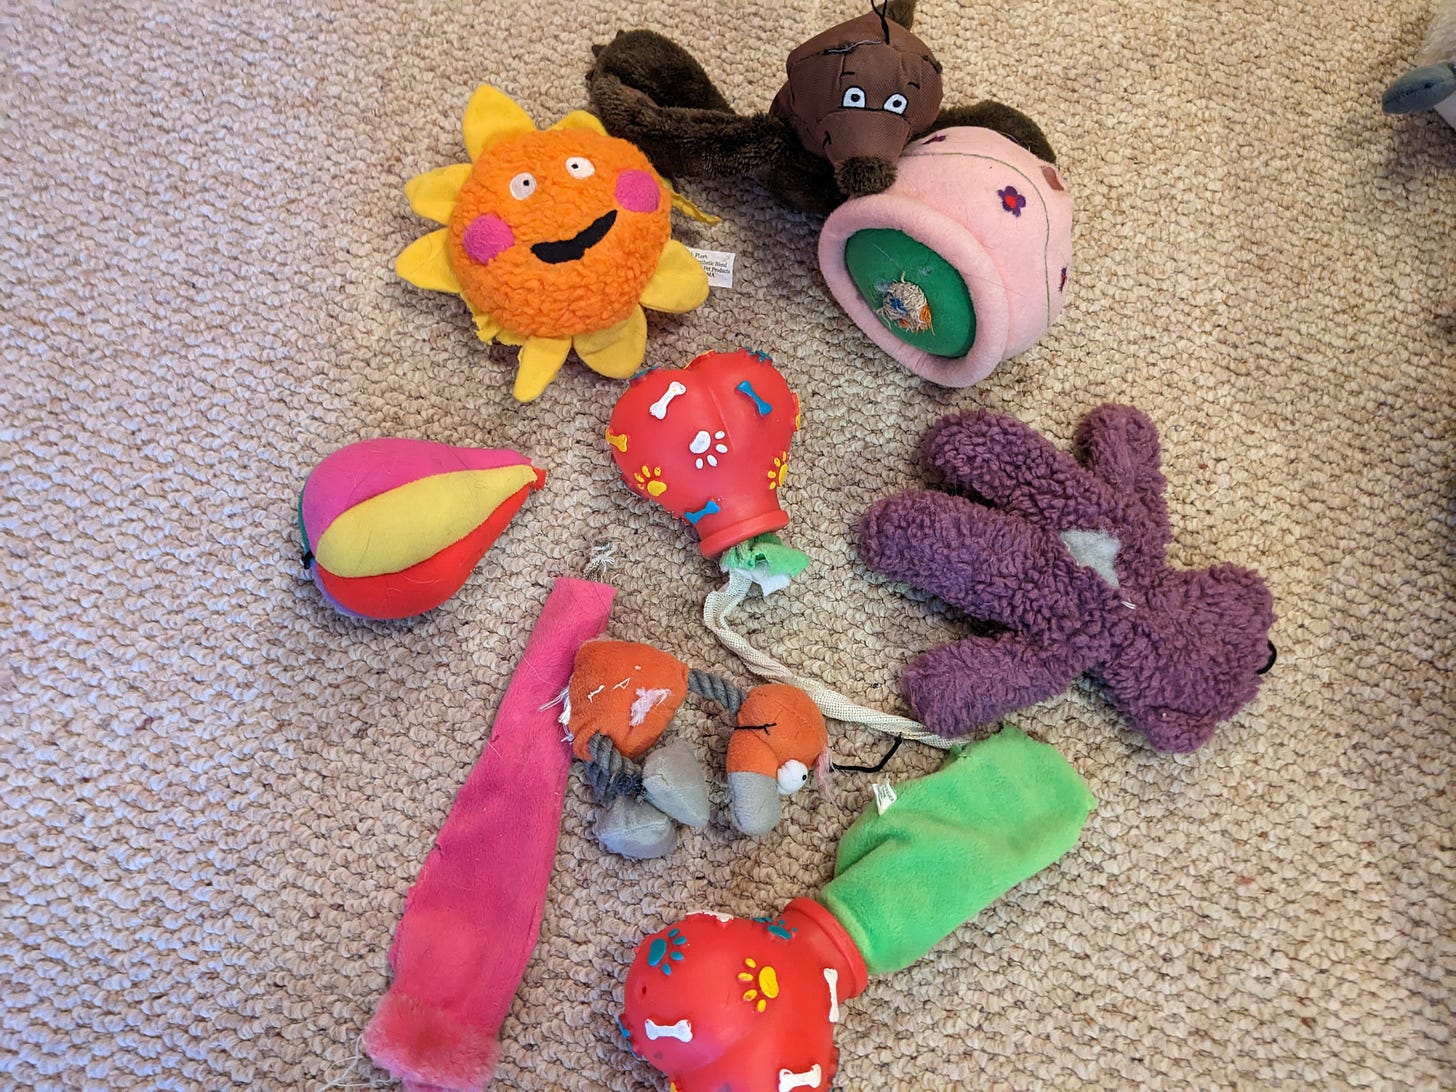 Collection of toy remnants